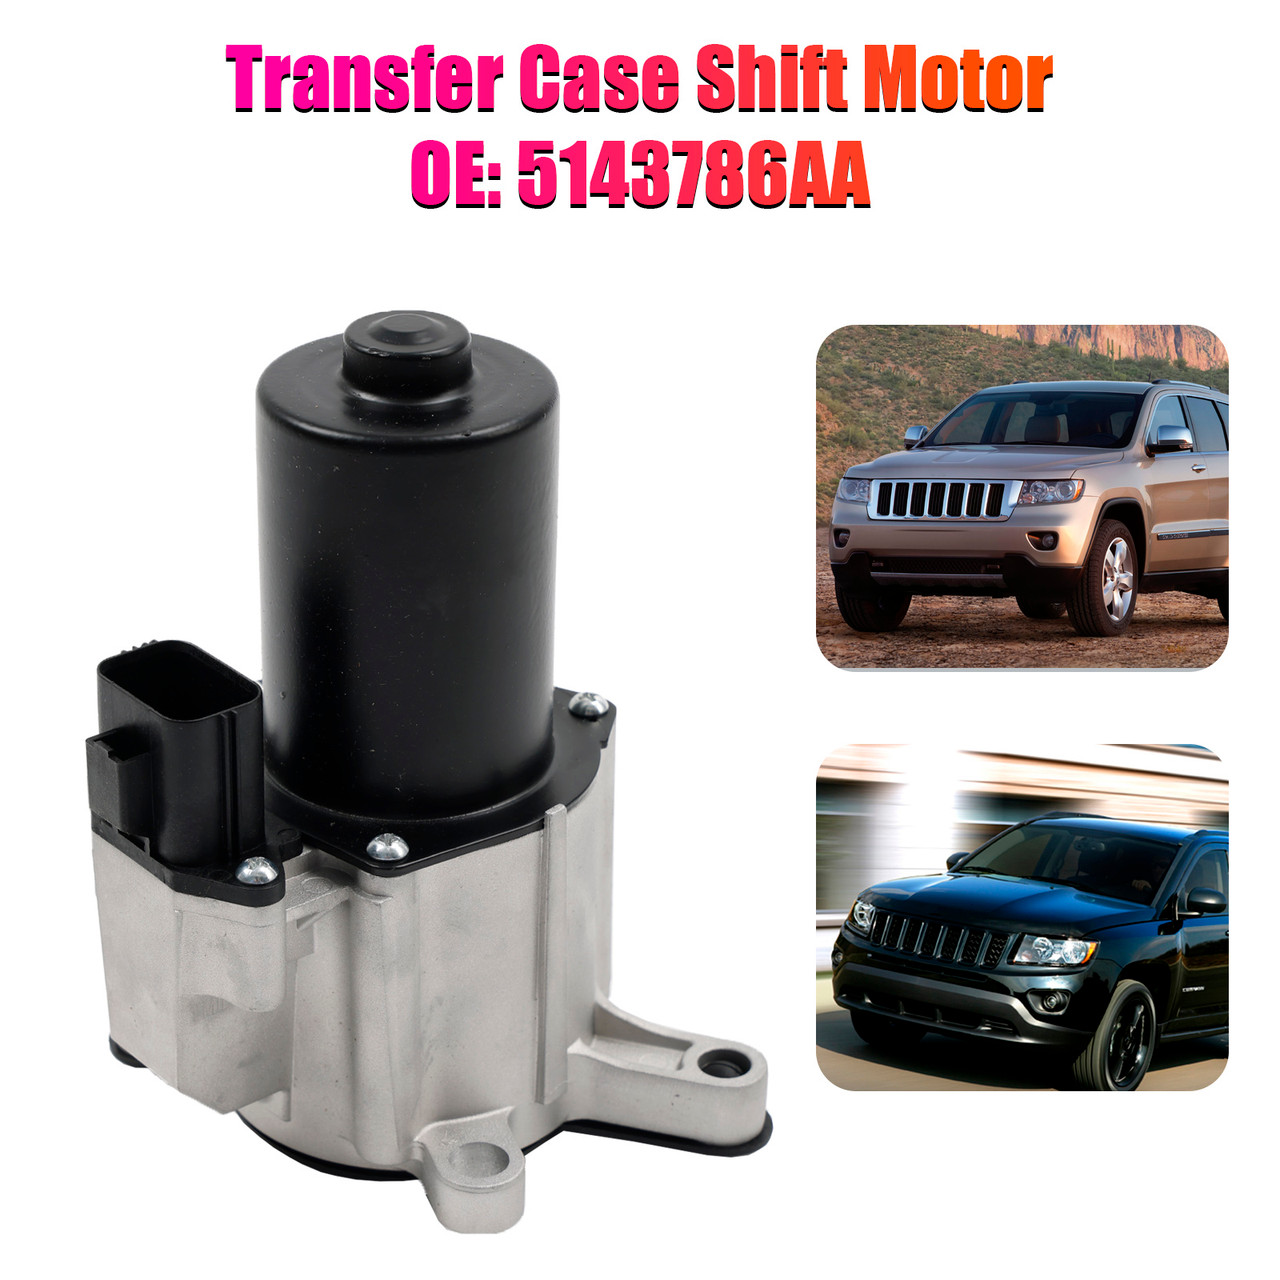 Transfer Case Shift Motor for Jeep Grand w/NV146 NV245 2005-2010 5143786AA